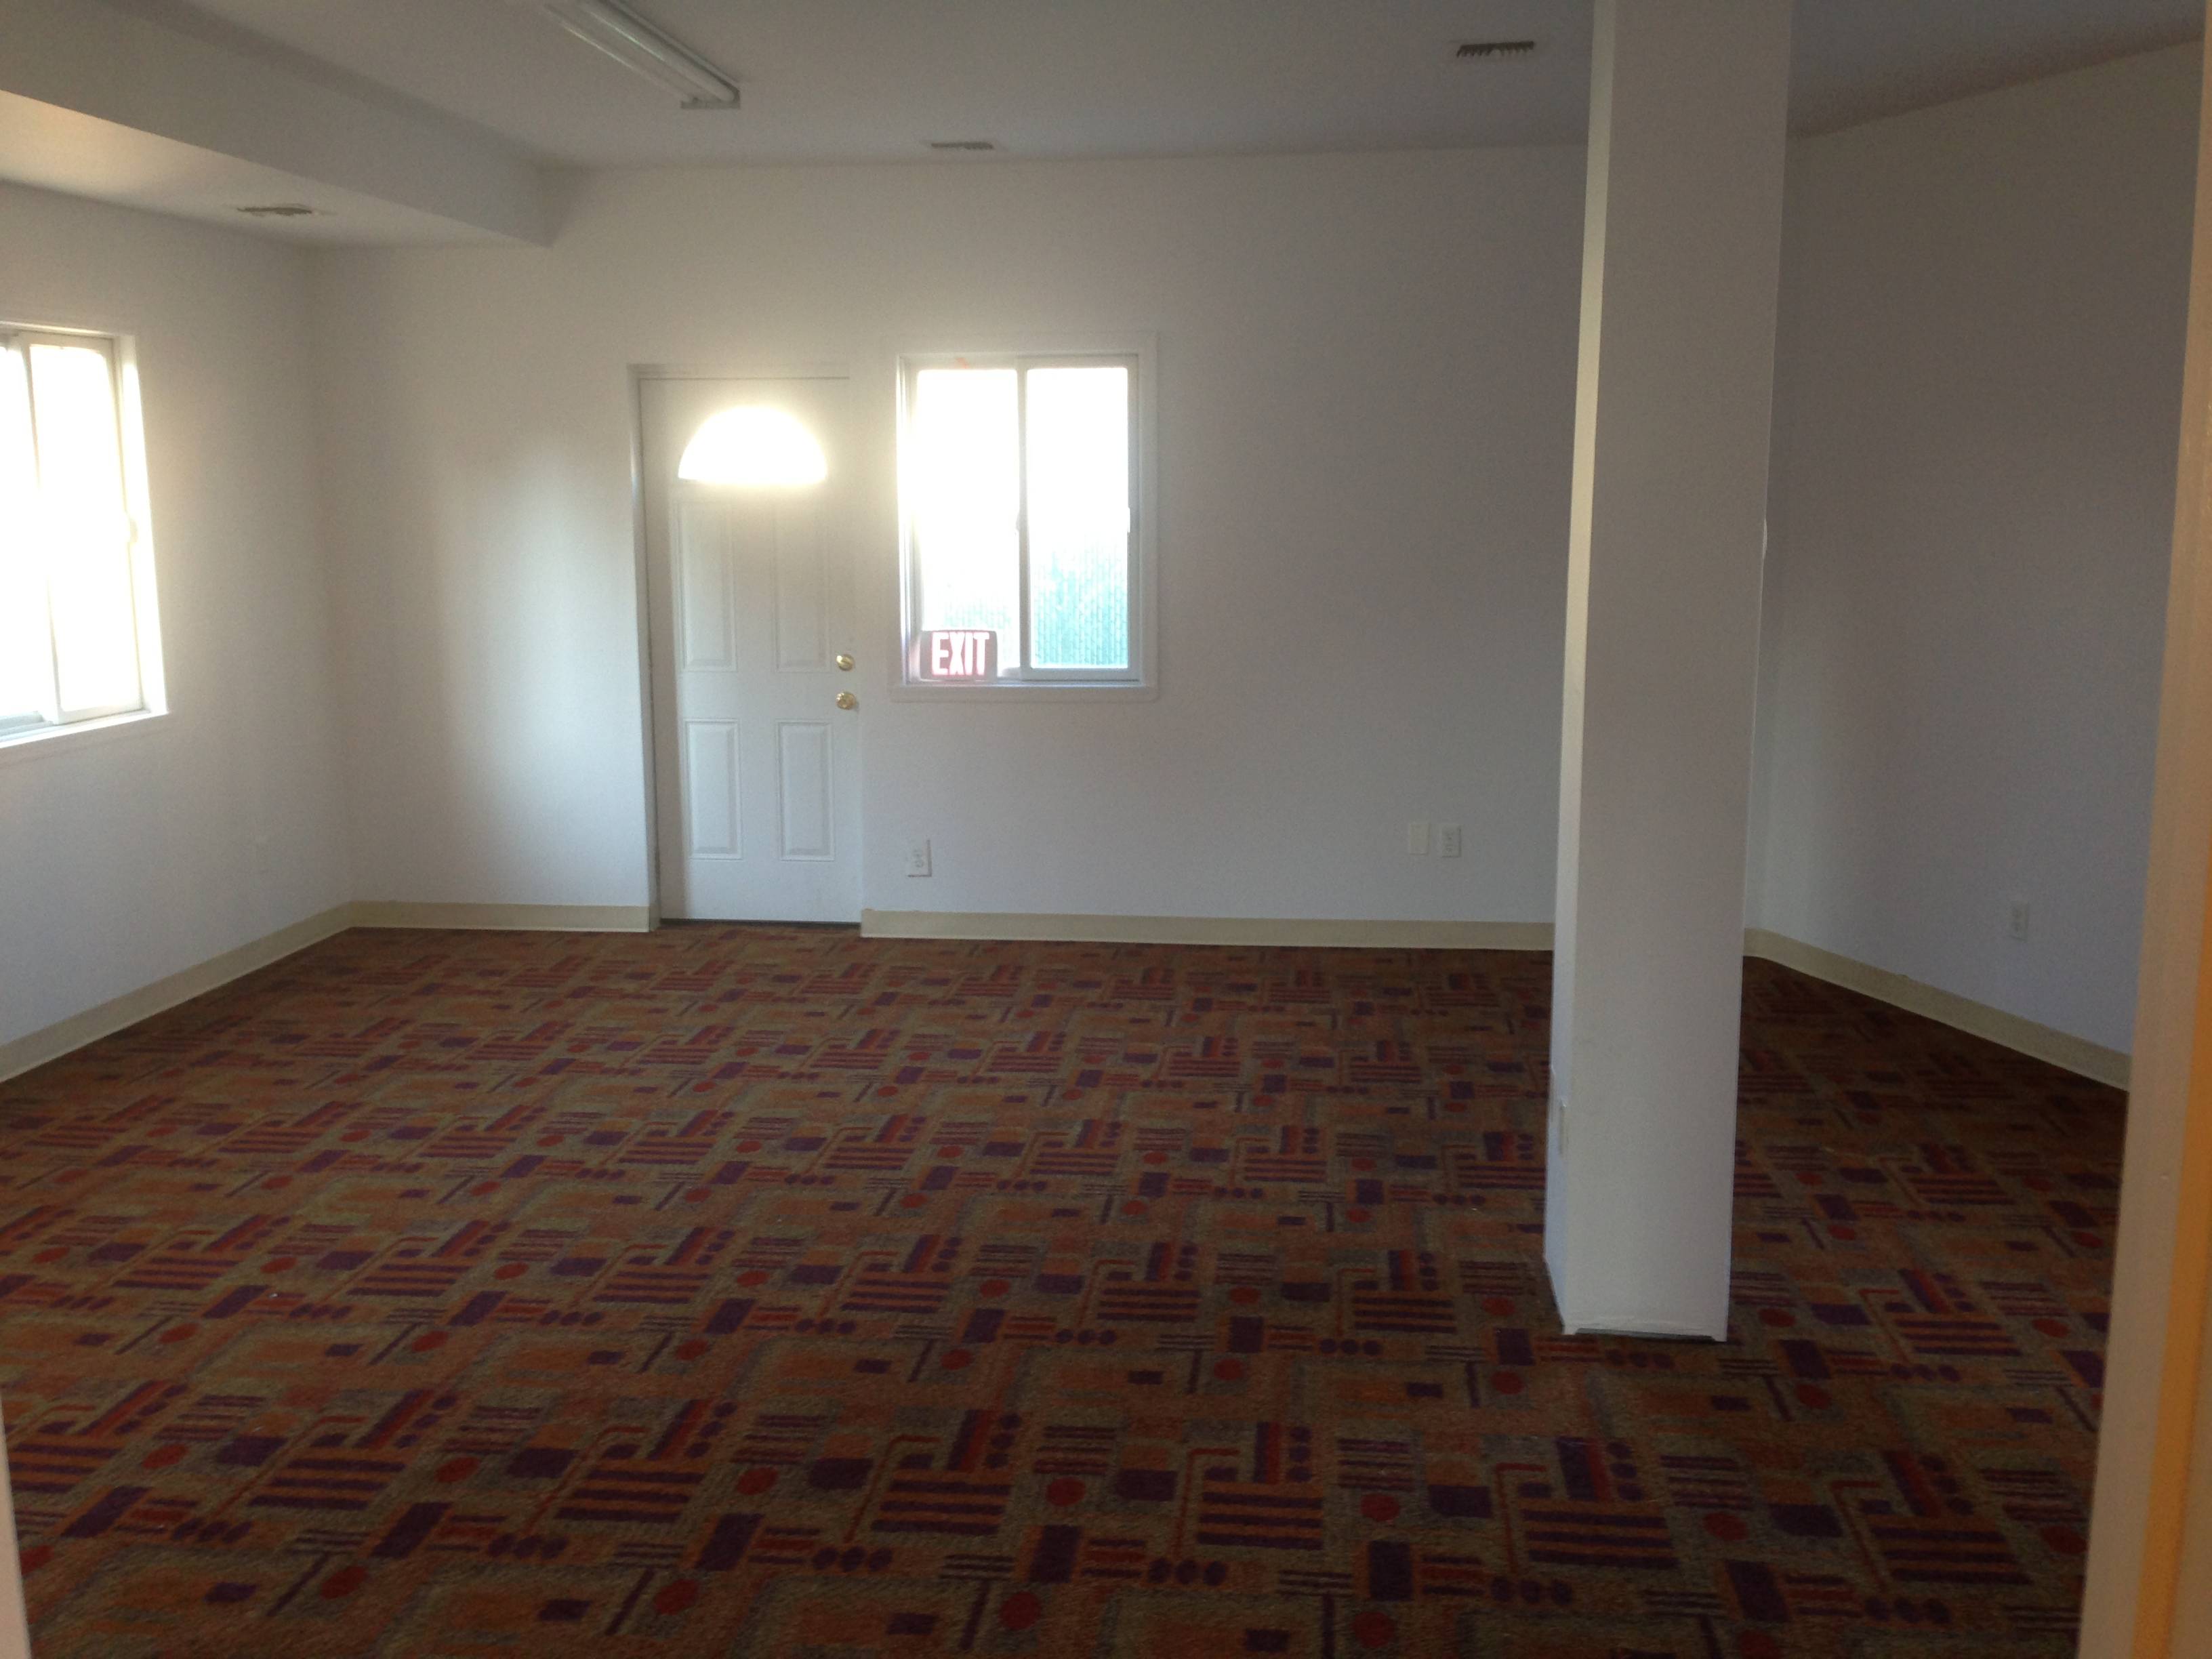 800 Sq Ft. Whitestone Office Space-Available Immediately-$1,700/Month